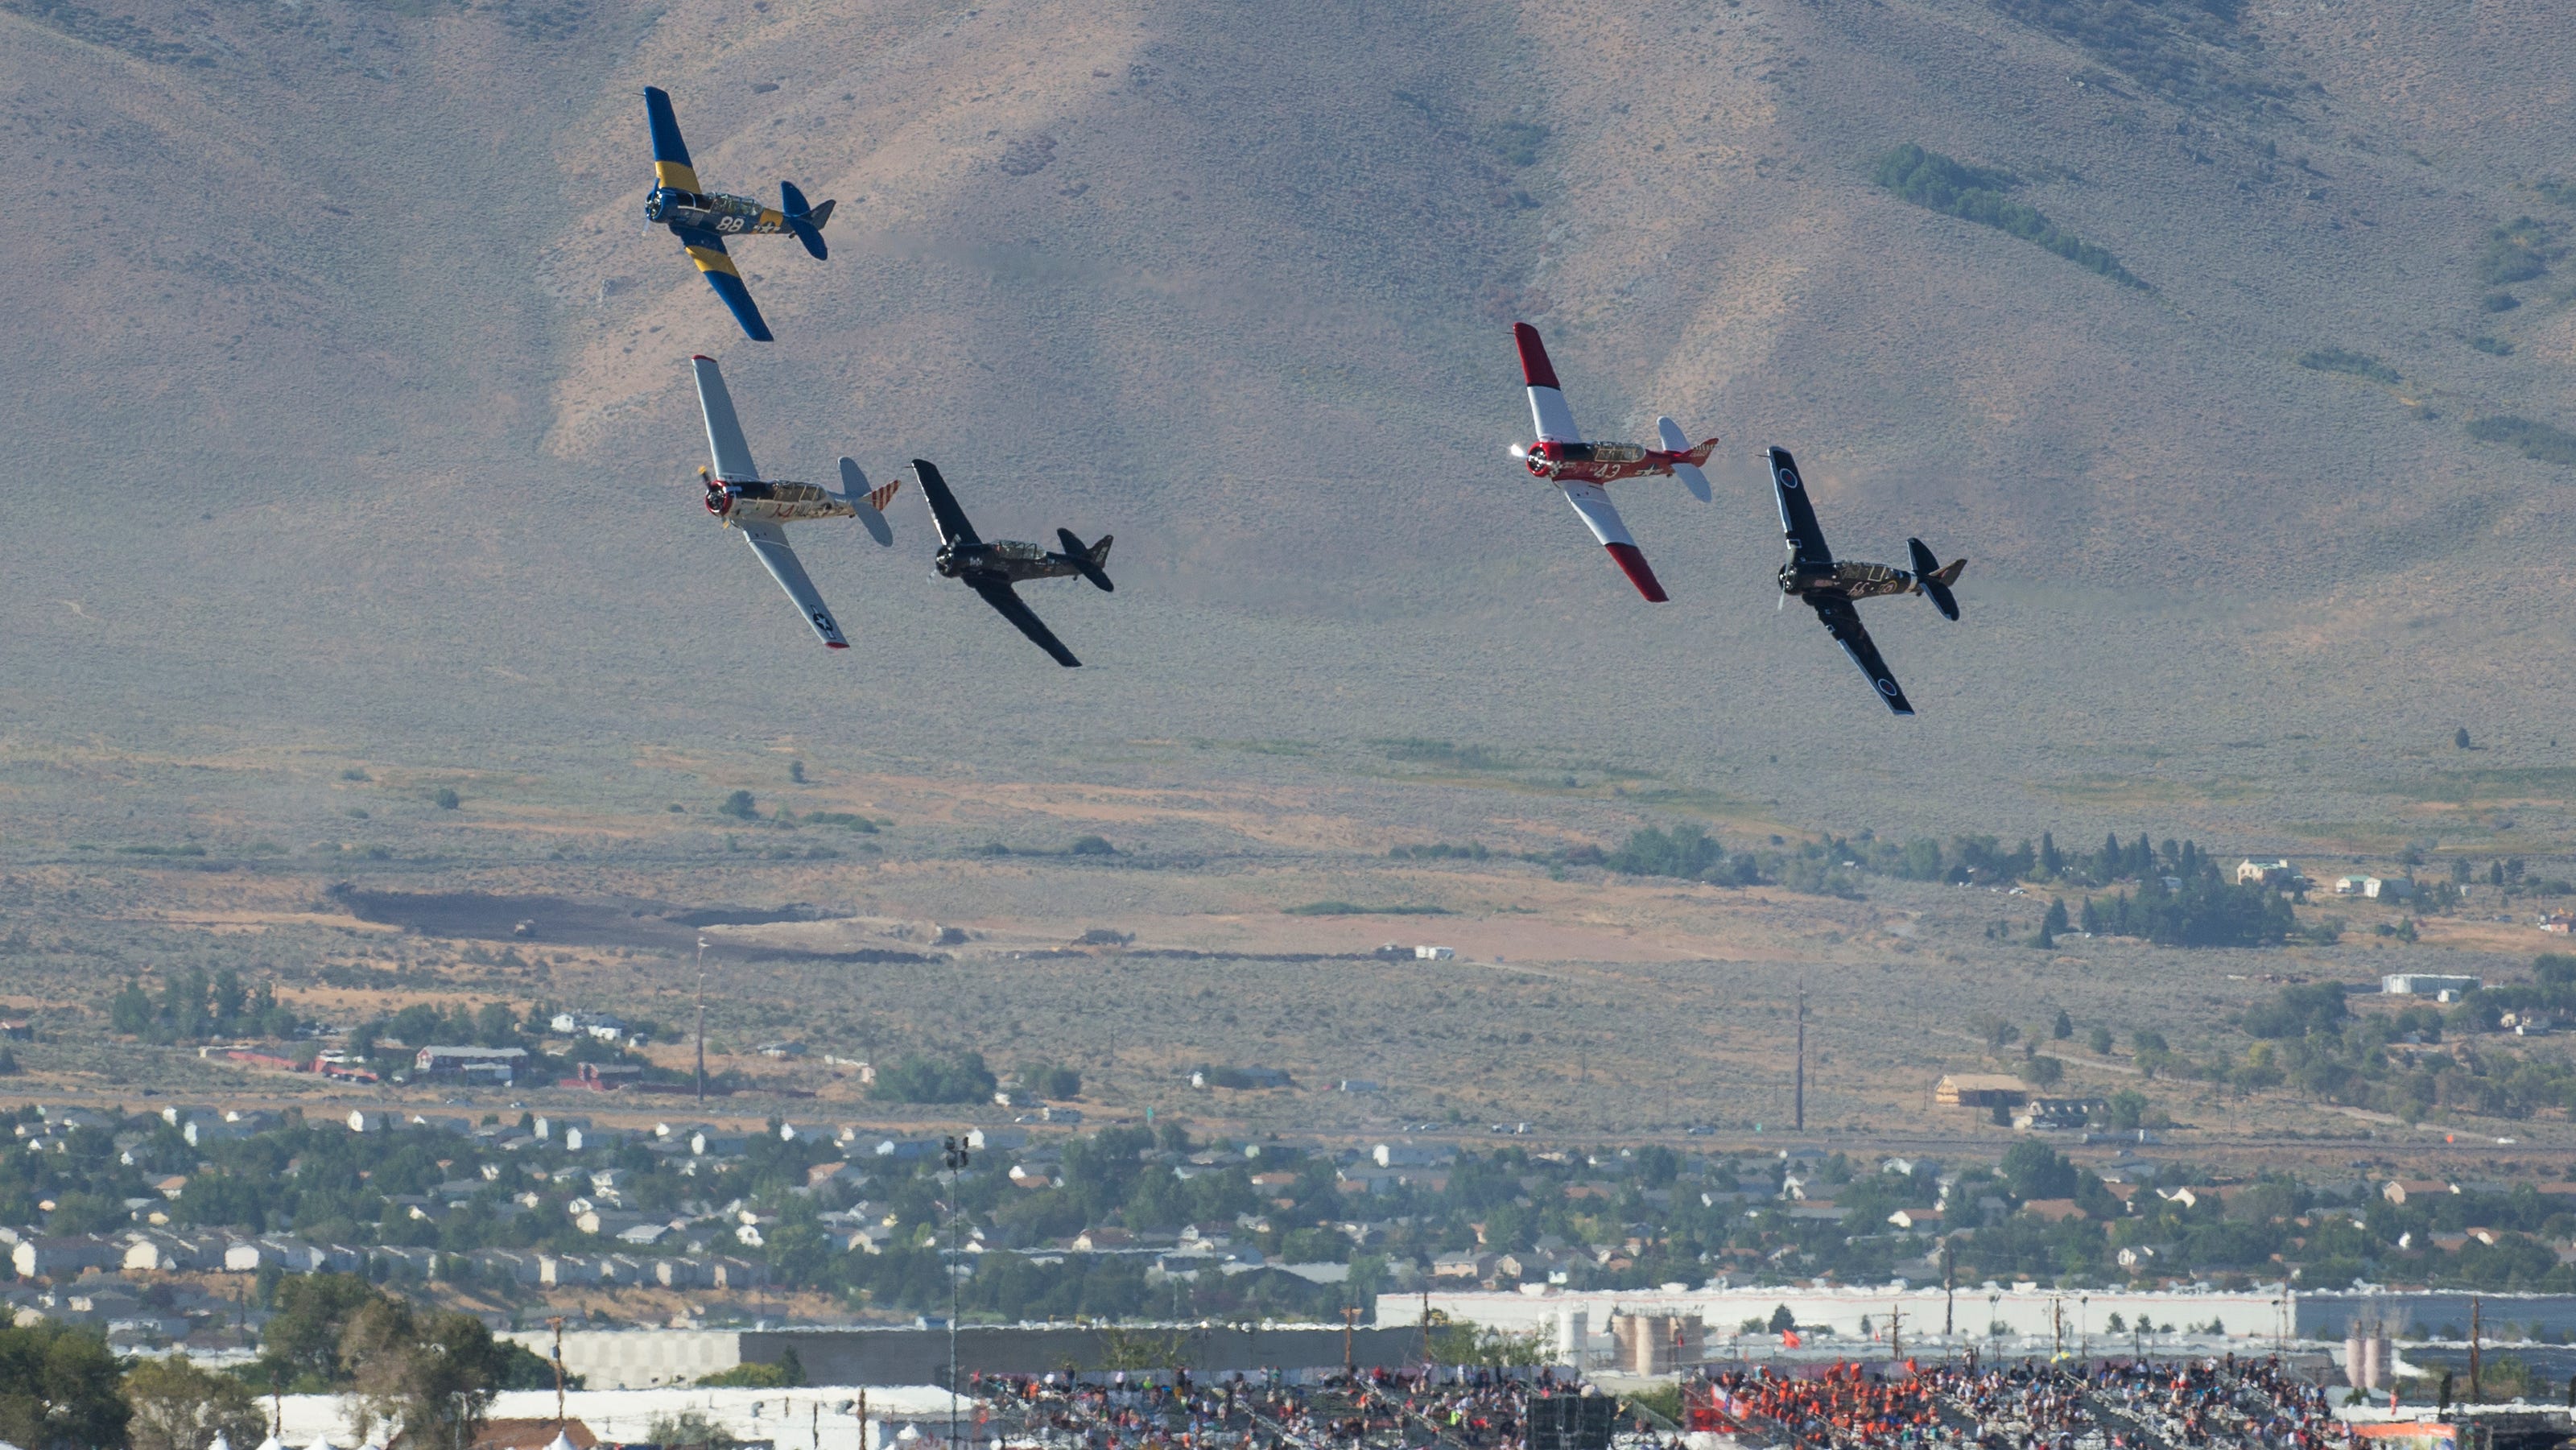 RACE RESULTS Reno Air Races